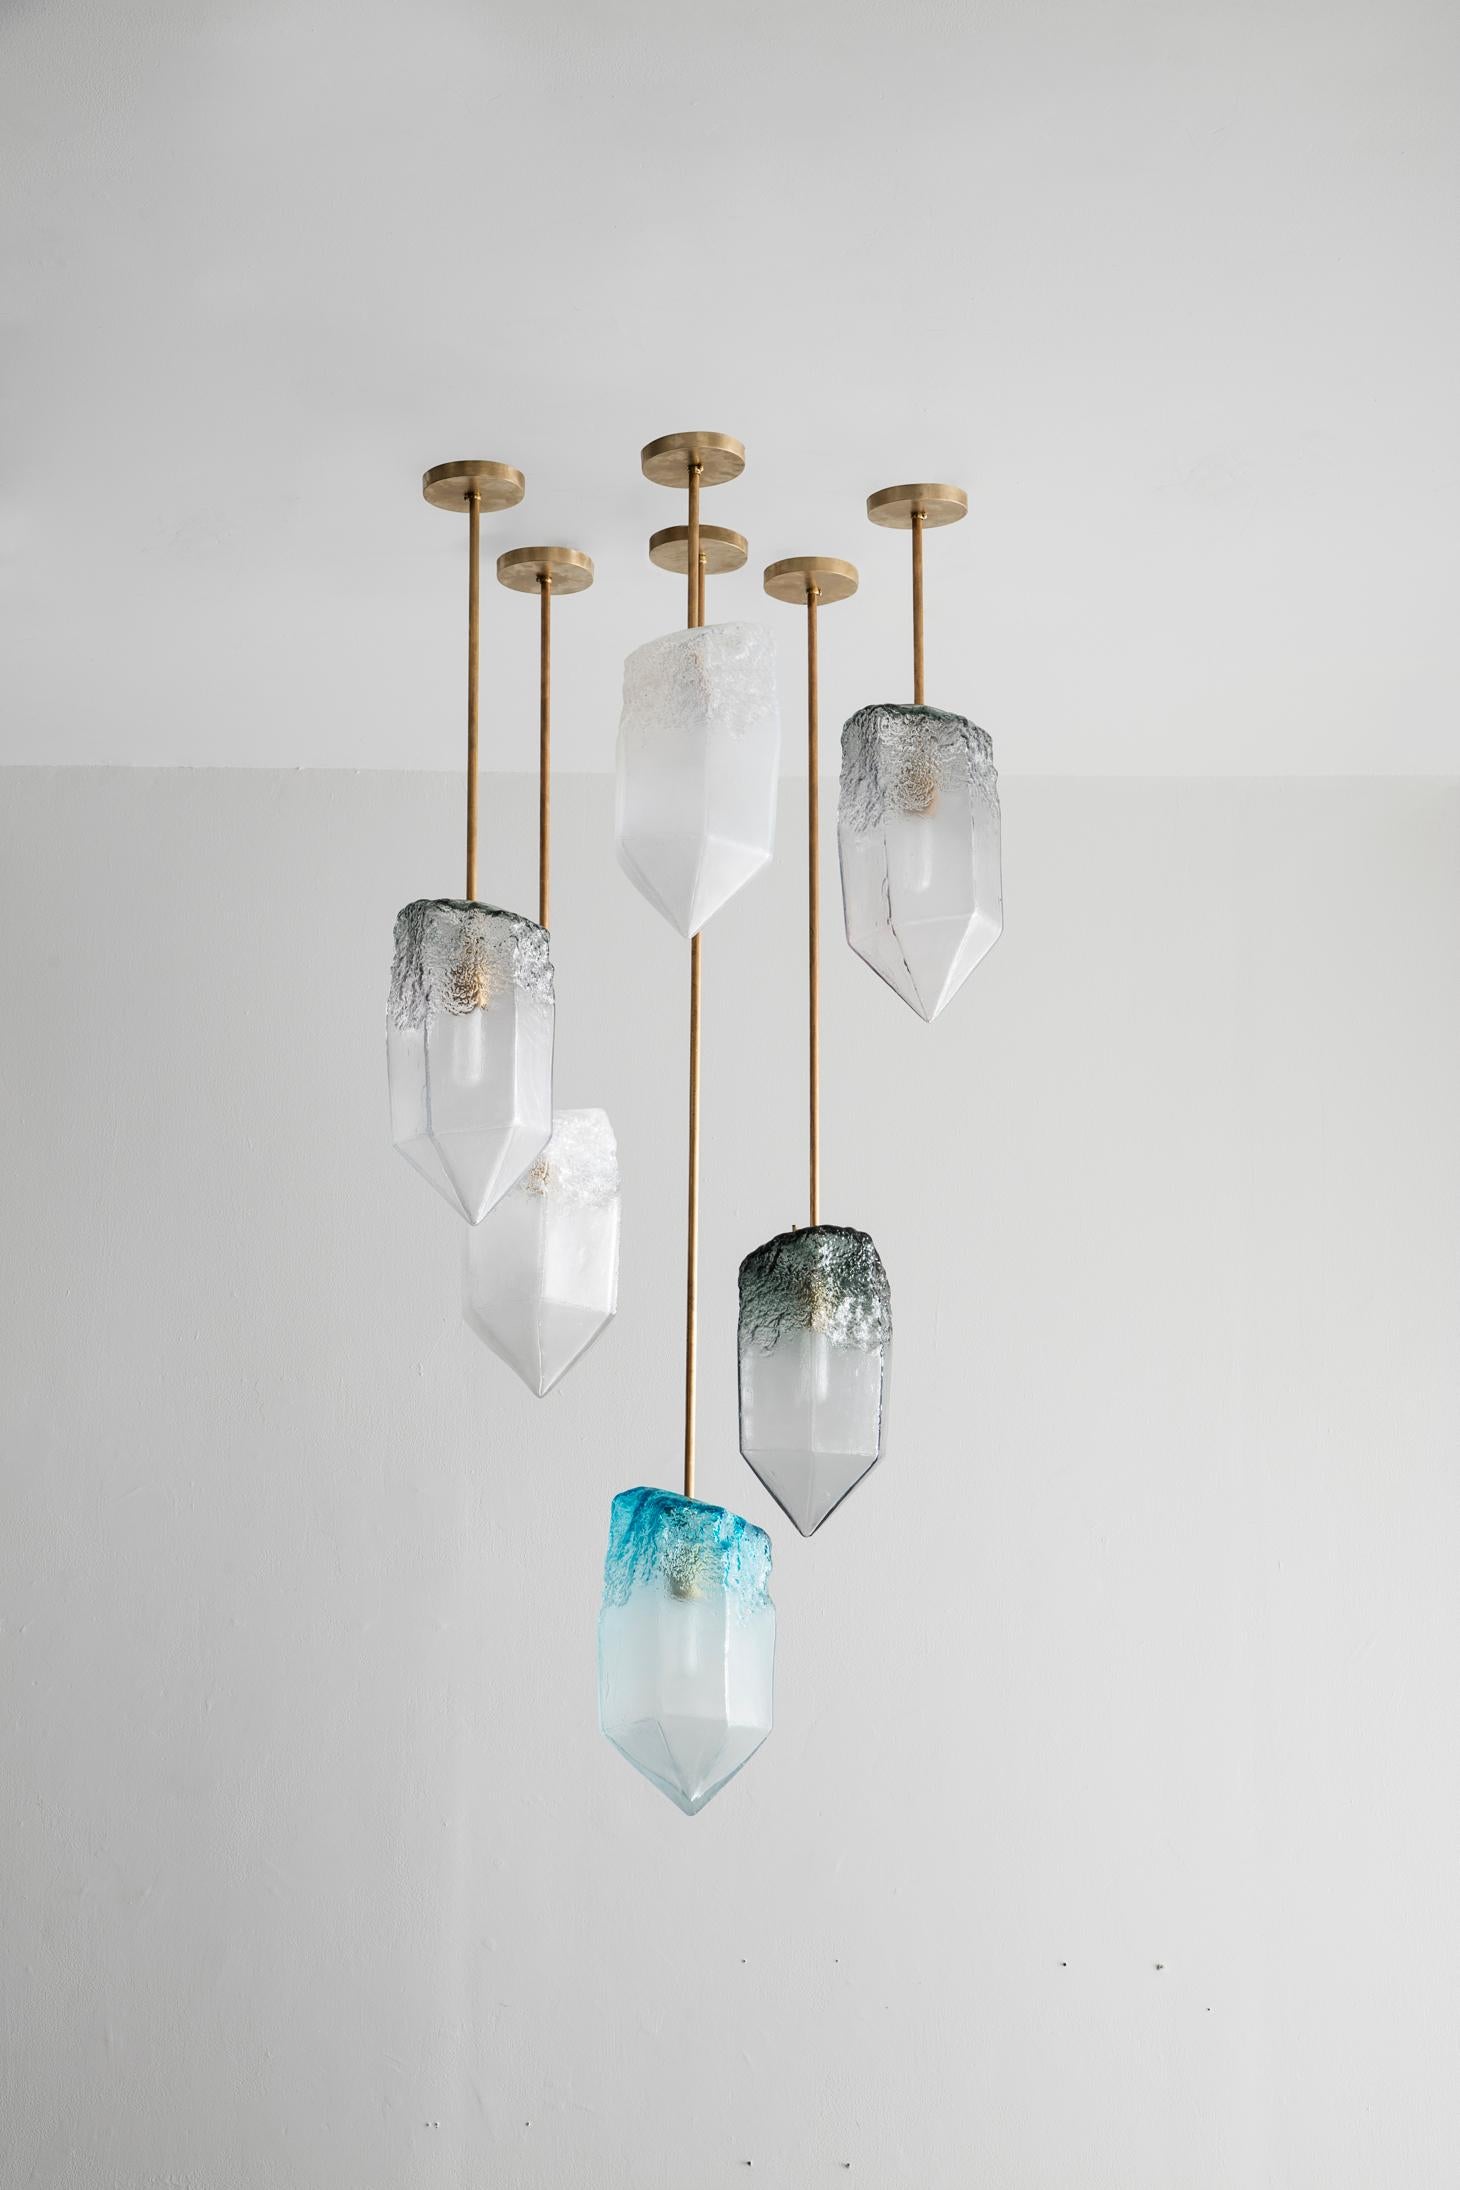 Modern Sculptural Pendant Light in Turquoise and Nickel by Jeff Zimmerman, 2016